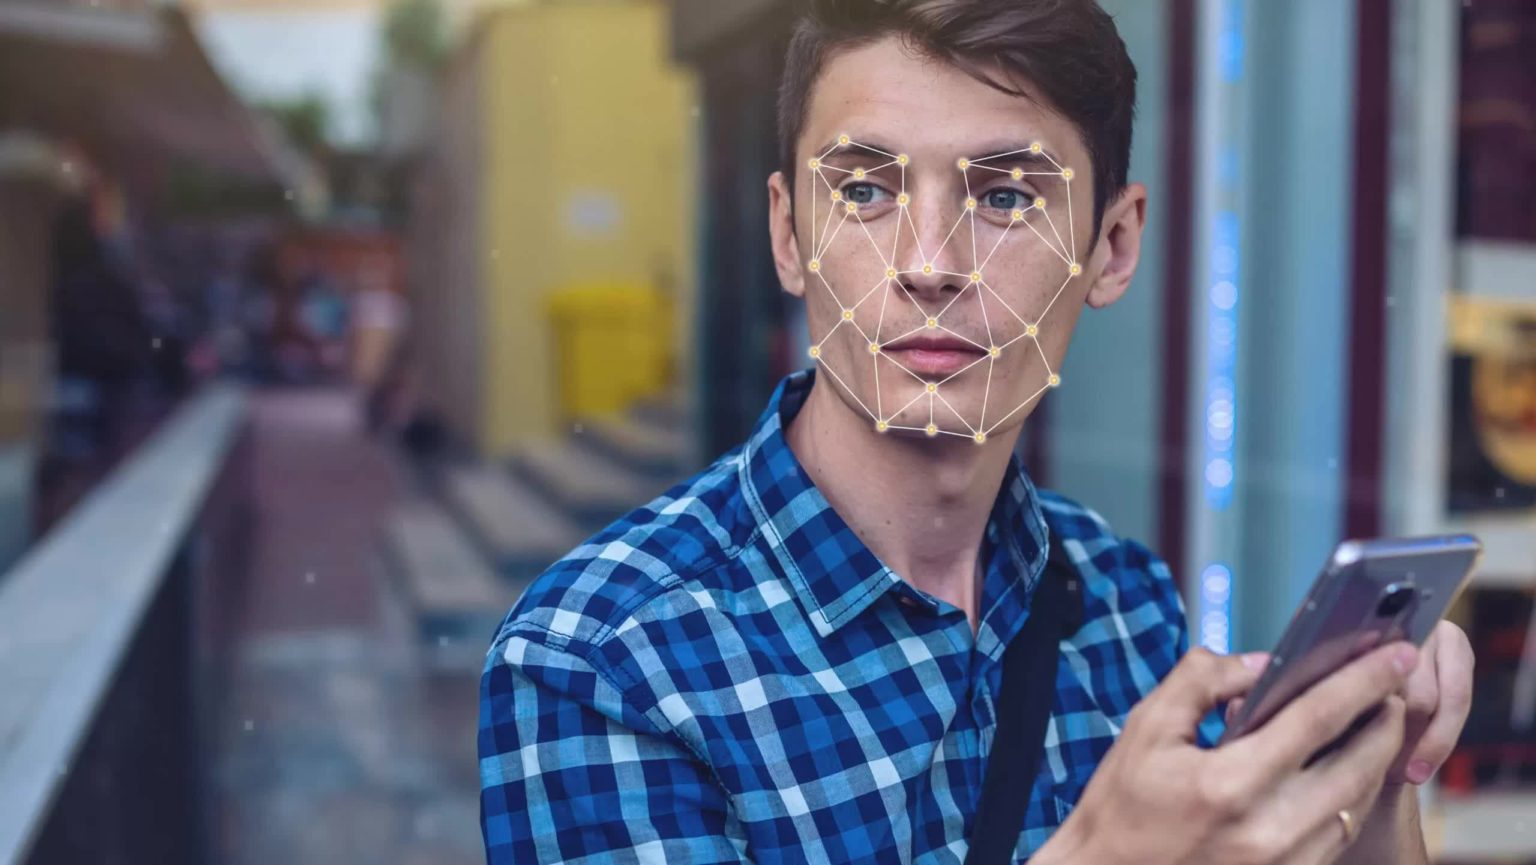 Selfie-based authentication is on the rise, alarming security experts